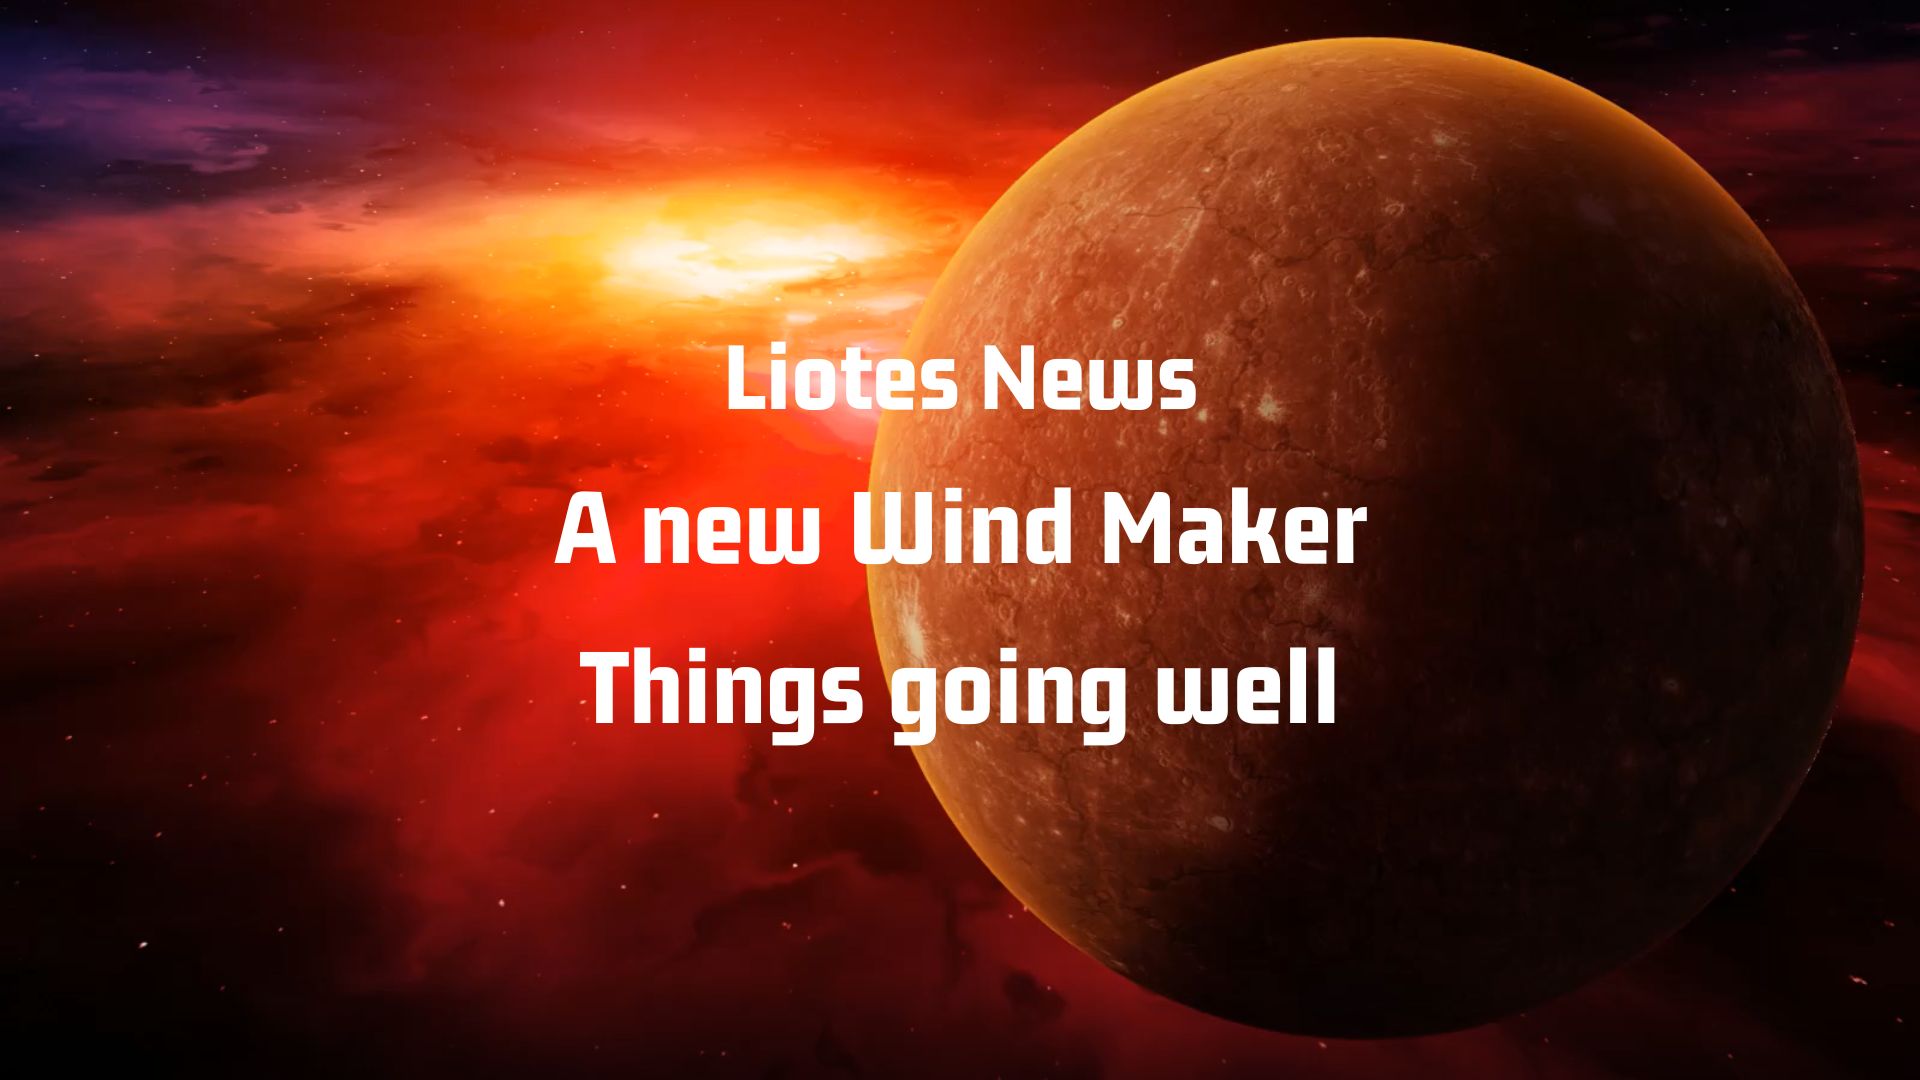 @liotes/things-going-well-for-liotes-and-a-new-wind-maker